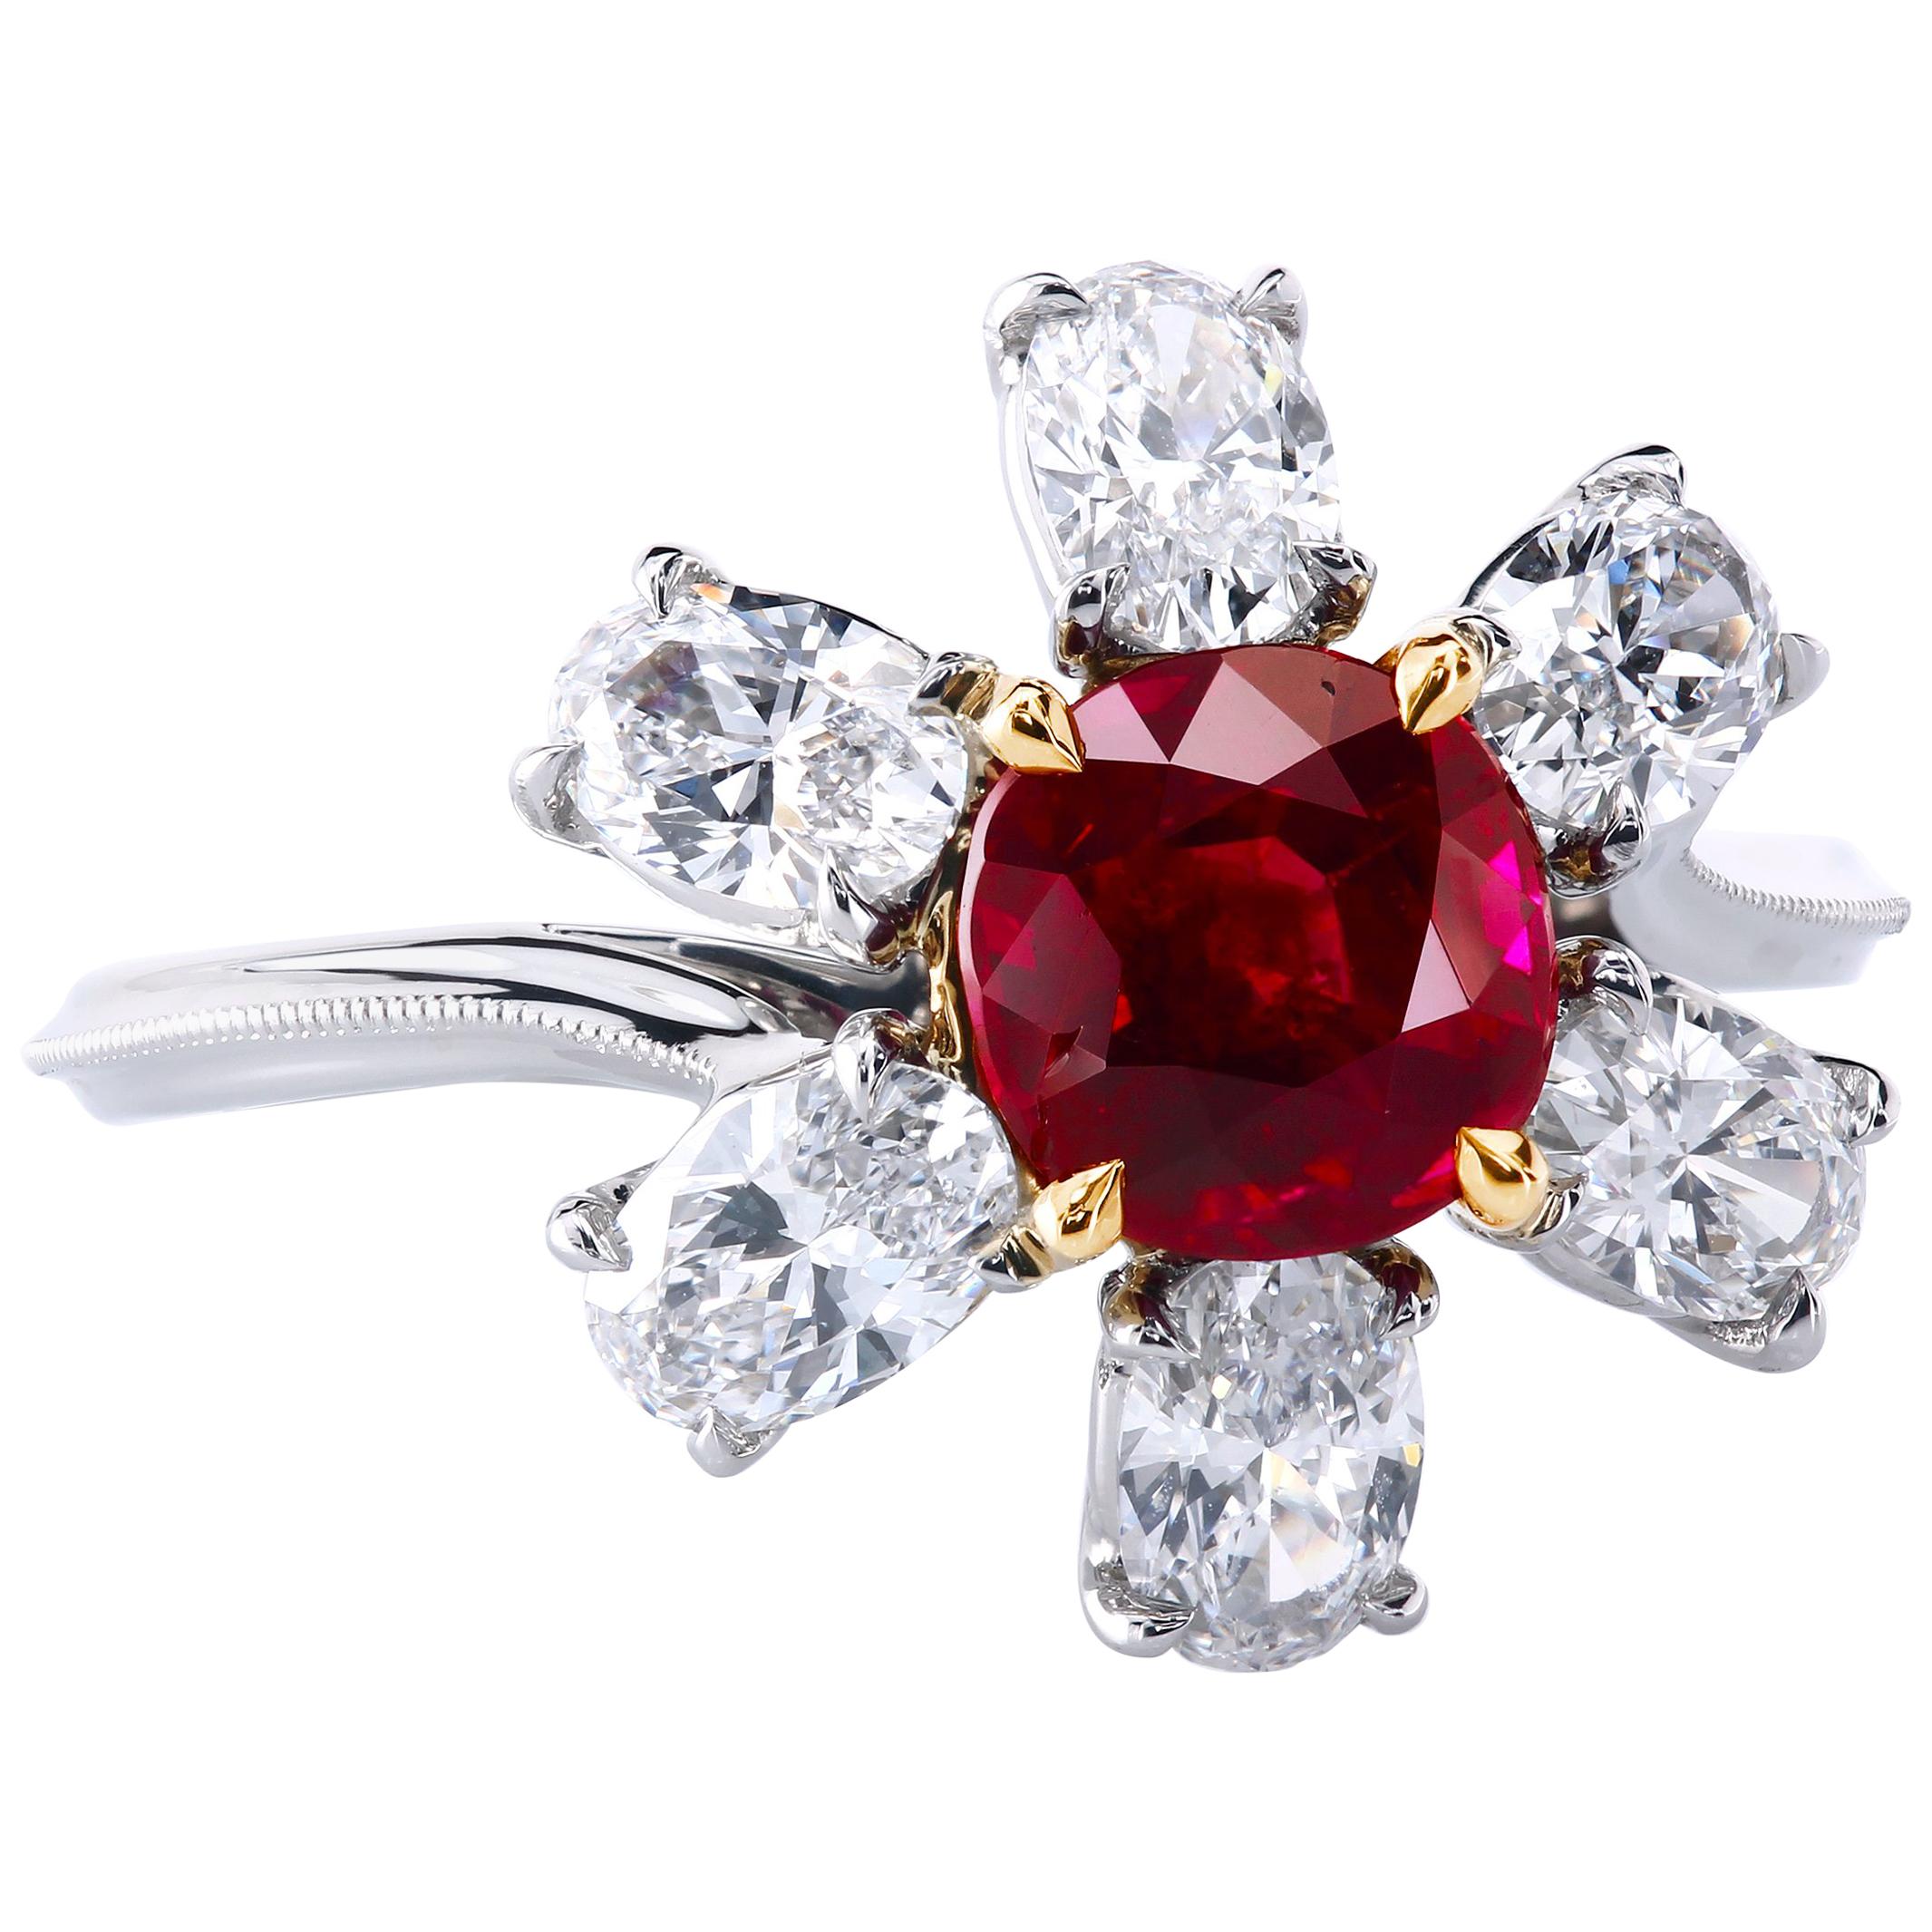 This delicious 1.61-carat eye candy of the certified pigeon-blood Burmese ruby is a gem's world royalty; Gubelin #16115039. 
The ruby is set into a Florette-style setting surrounded by six elongated antique oval diamond petals, EF/VS, total weight